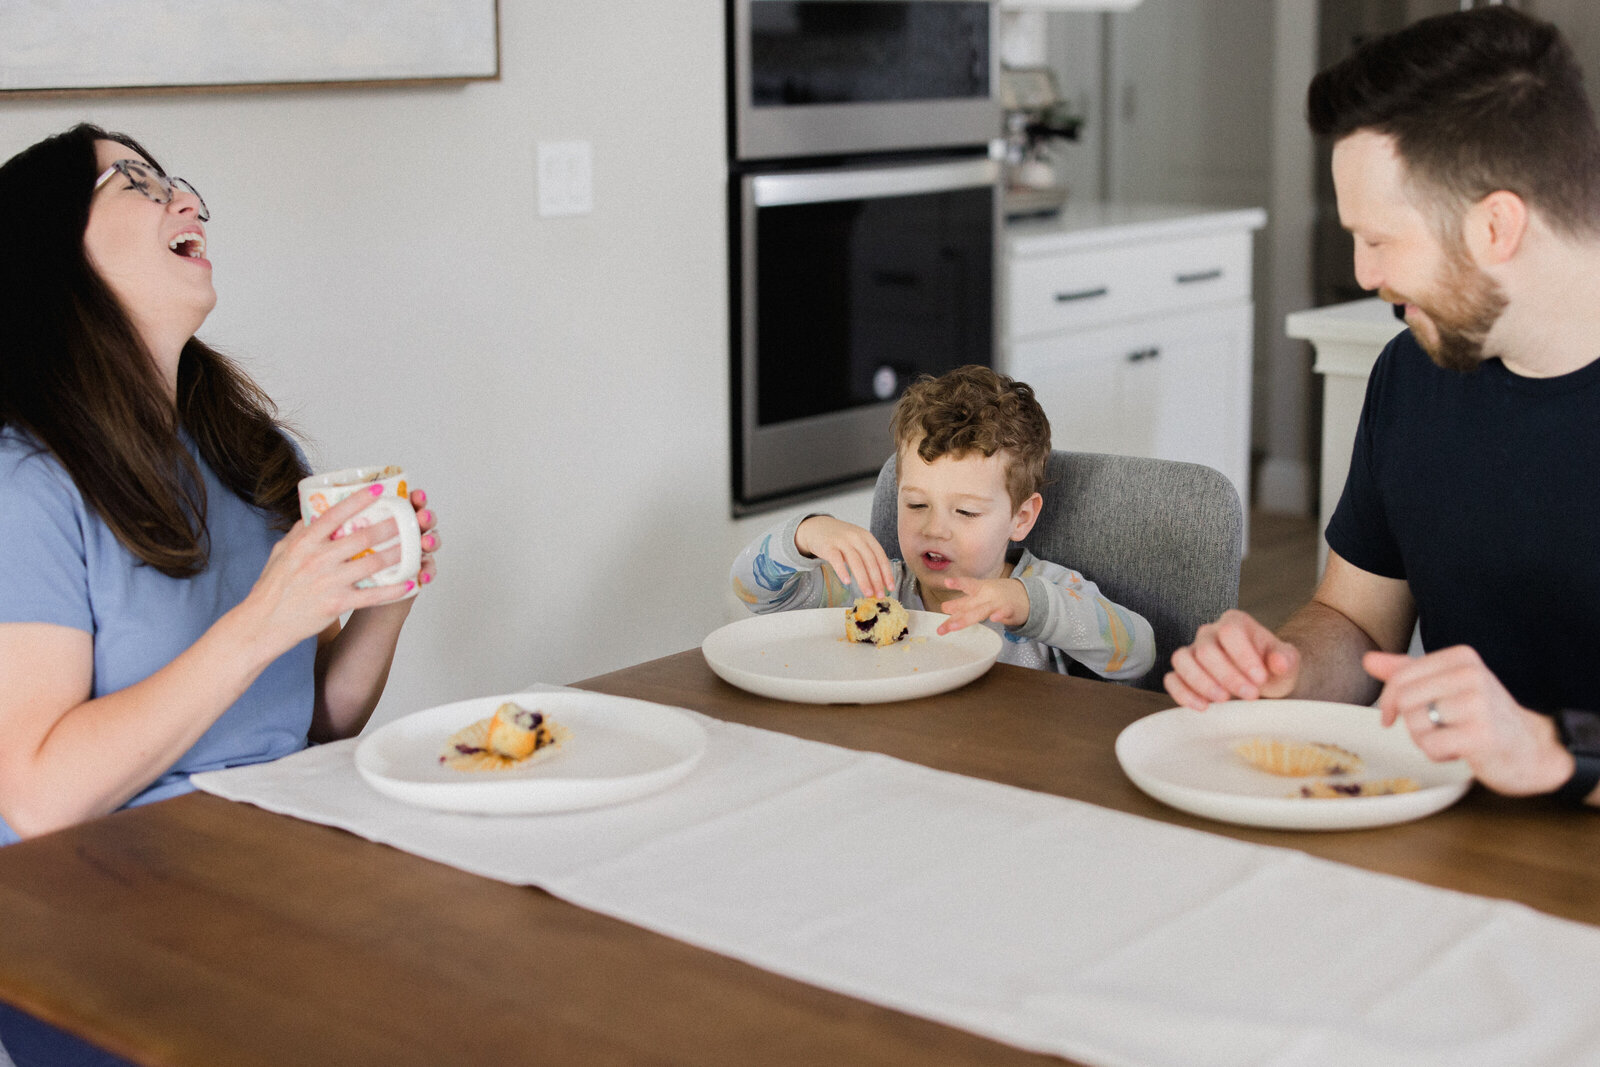 Mom laughs as she eats breakfast at the dining room table with husband and son